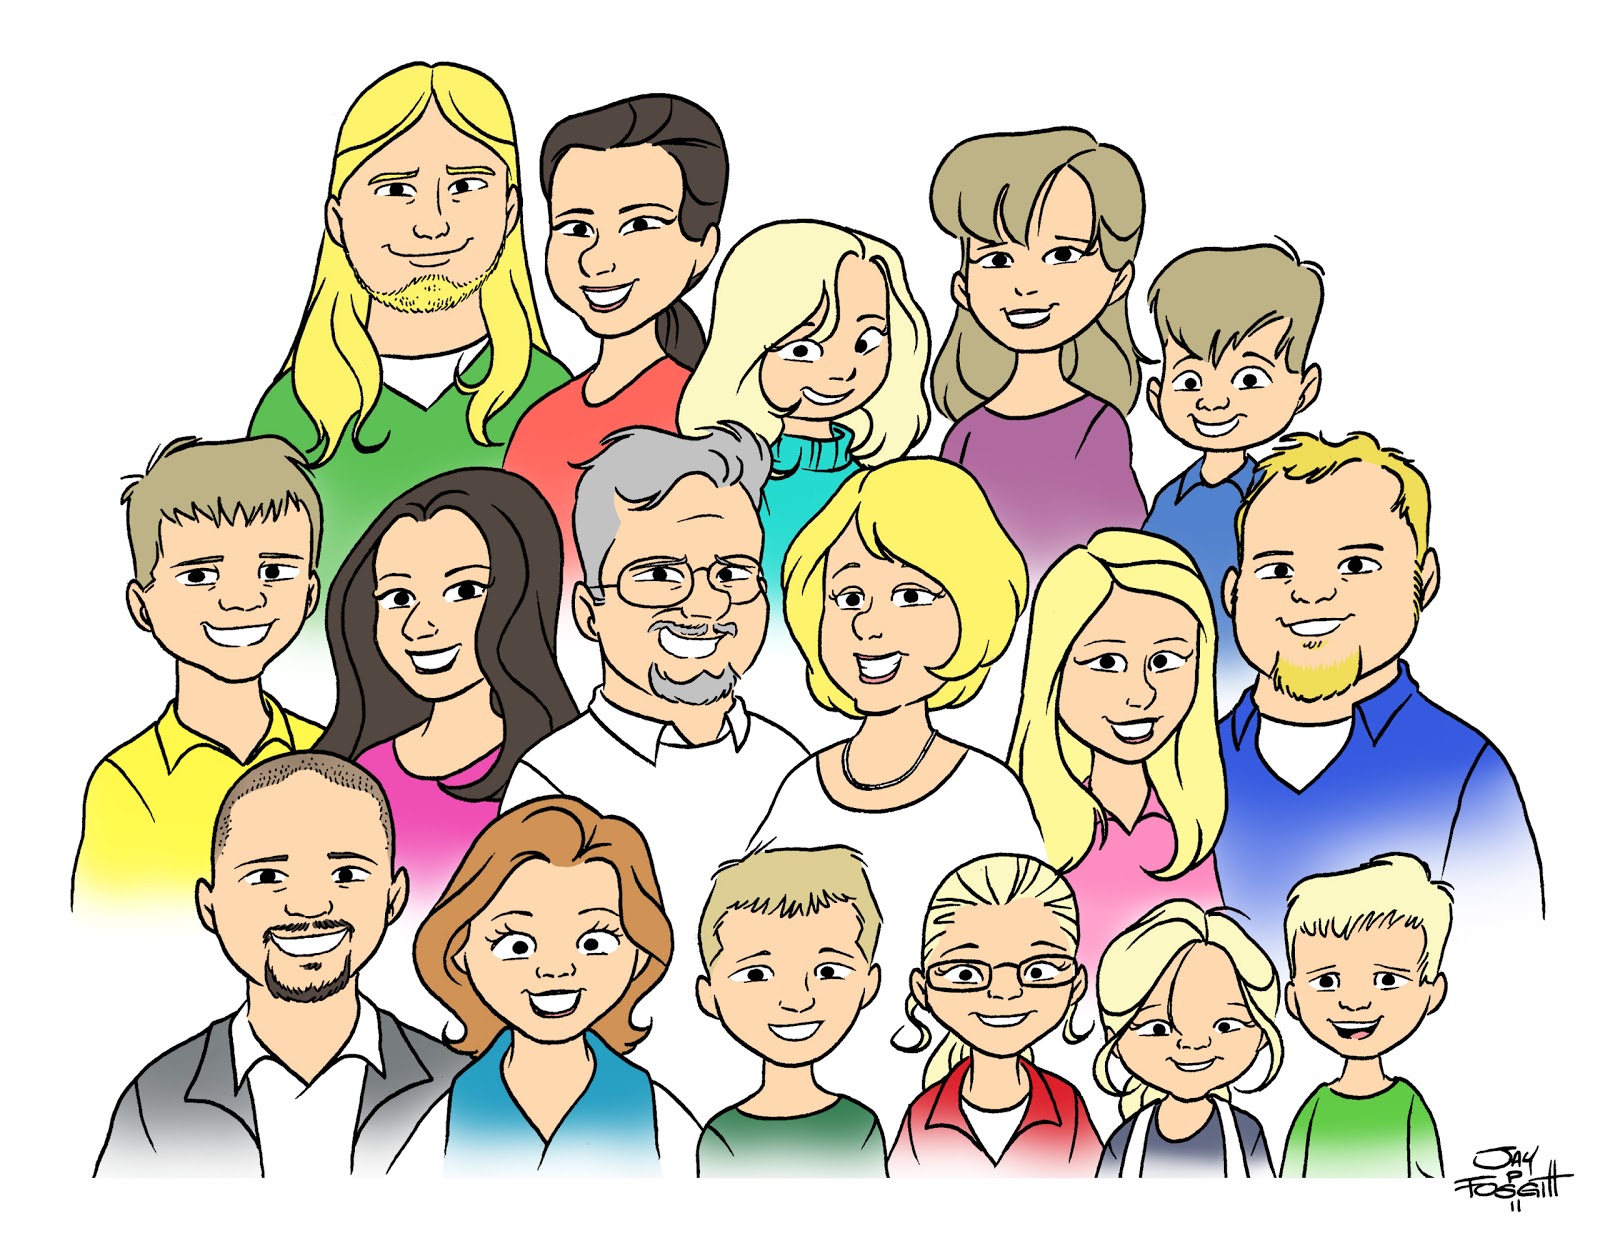 Family Of 4 2 Sisters Clipart   Cliparthut   Free Clipart